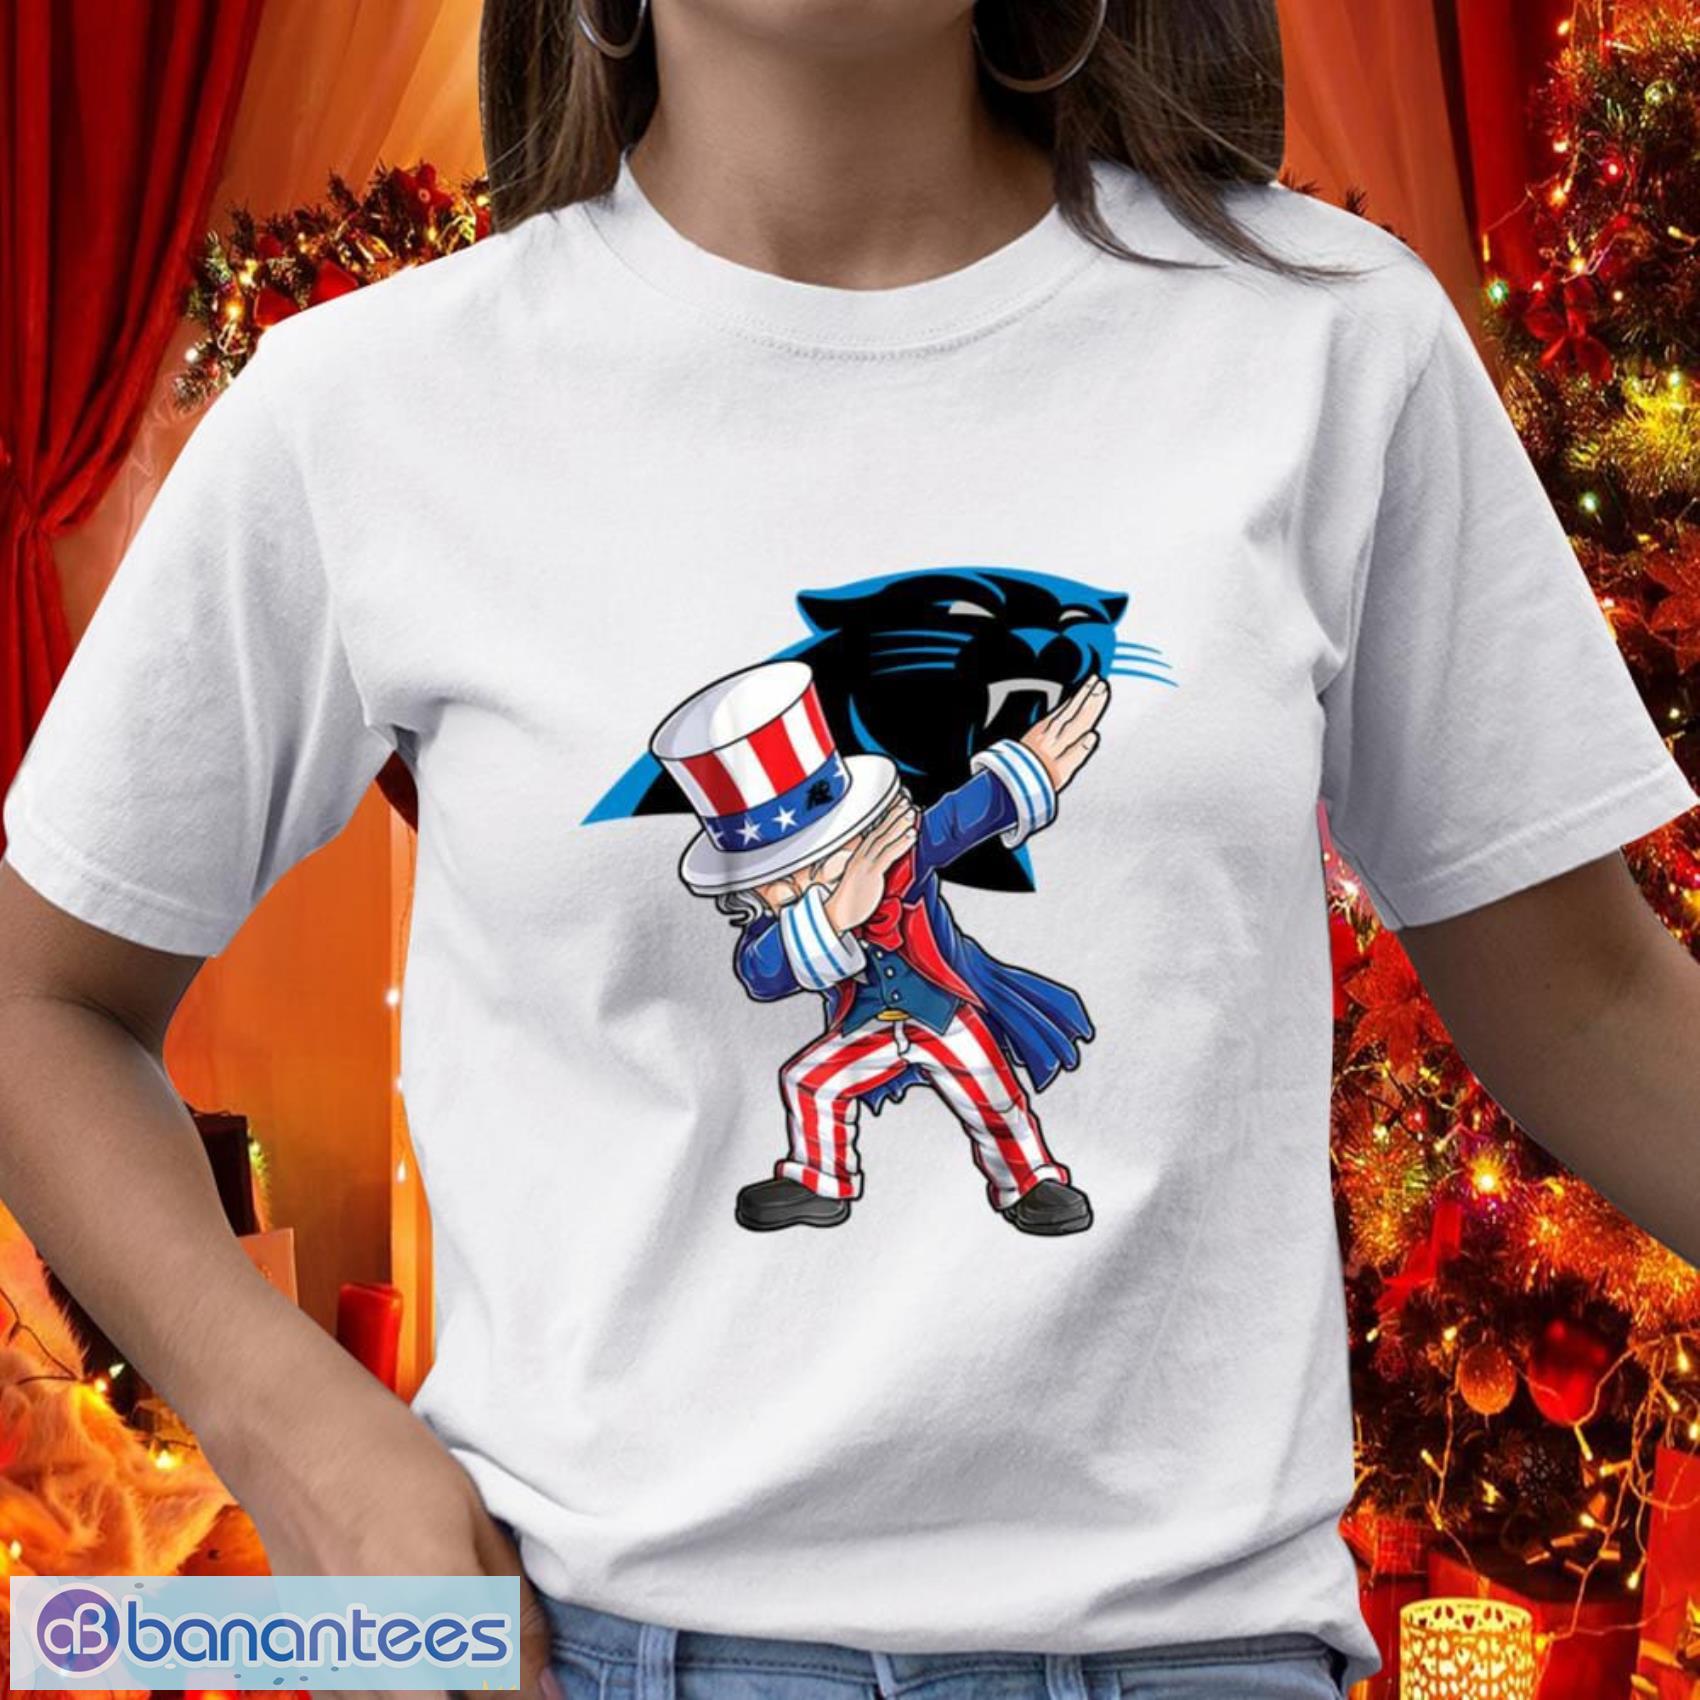 Carolina Panthers NFL Football Gift Fr Fans Dabbing Uncle Sam The Fourth of July T Shirt - Carolina Panthers NFL Football Dabbing Uncle Sam The Fourth of July T Shirt_1